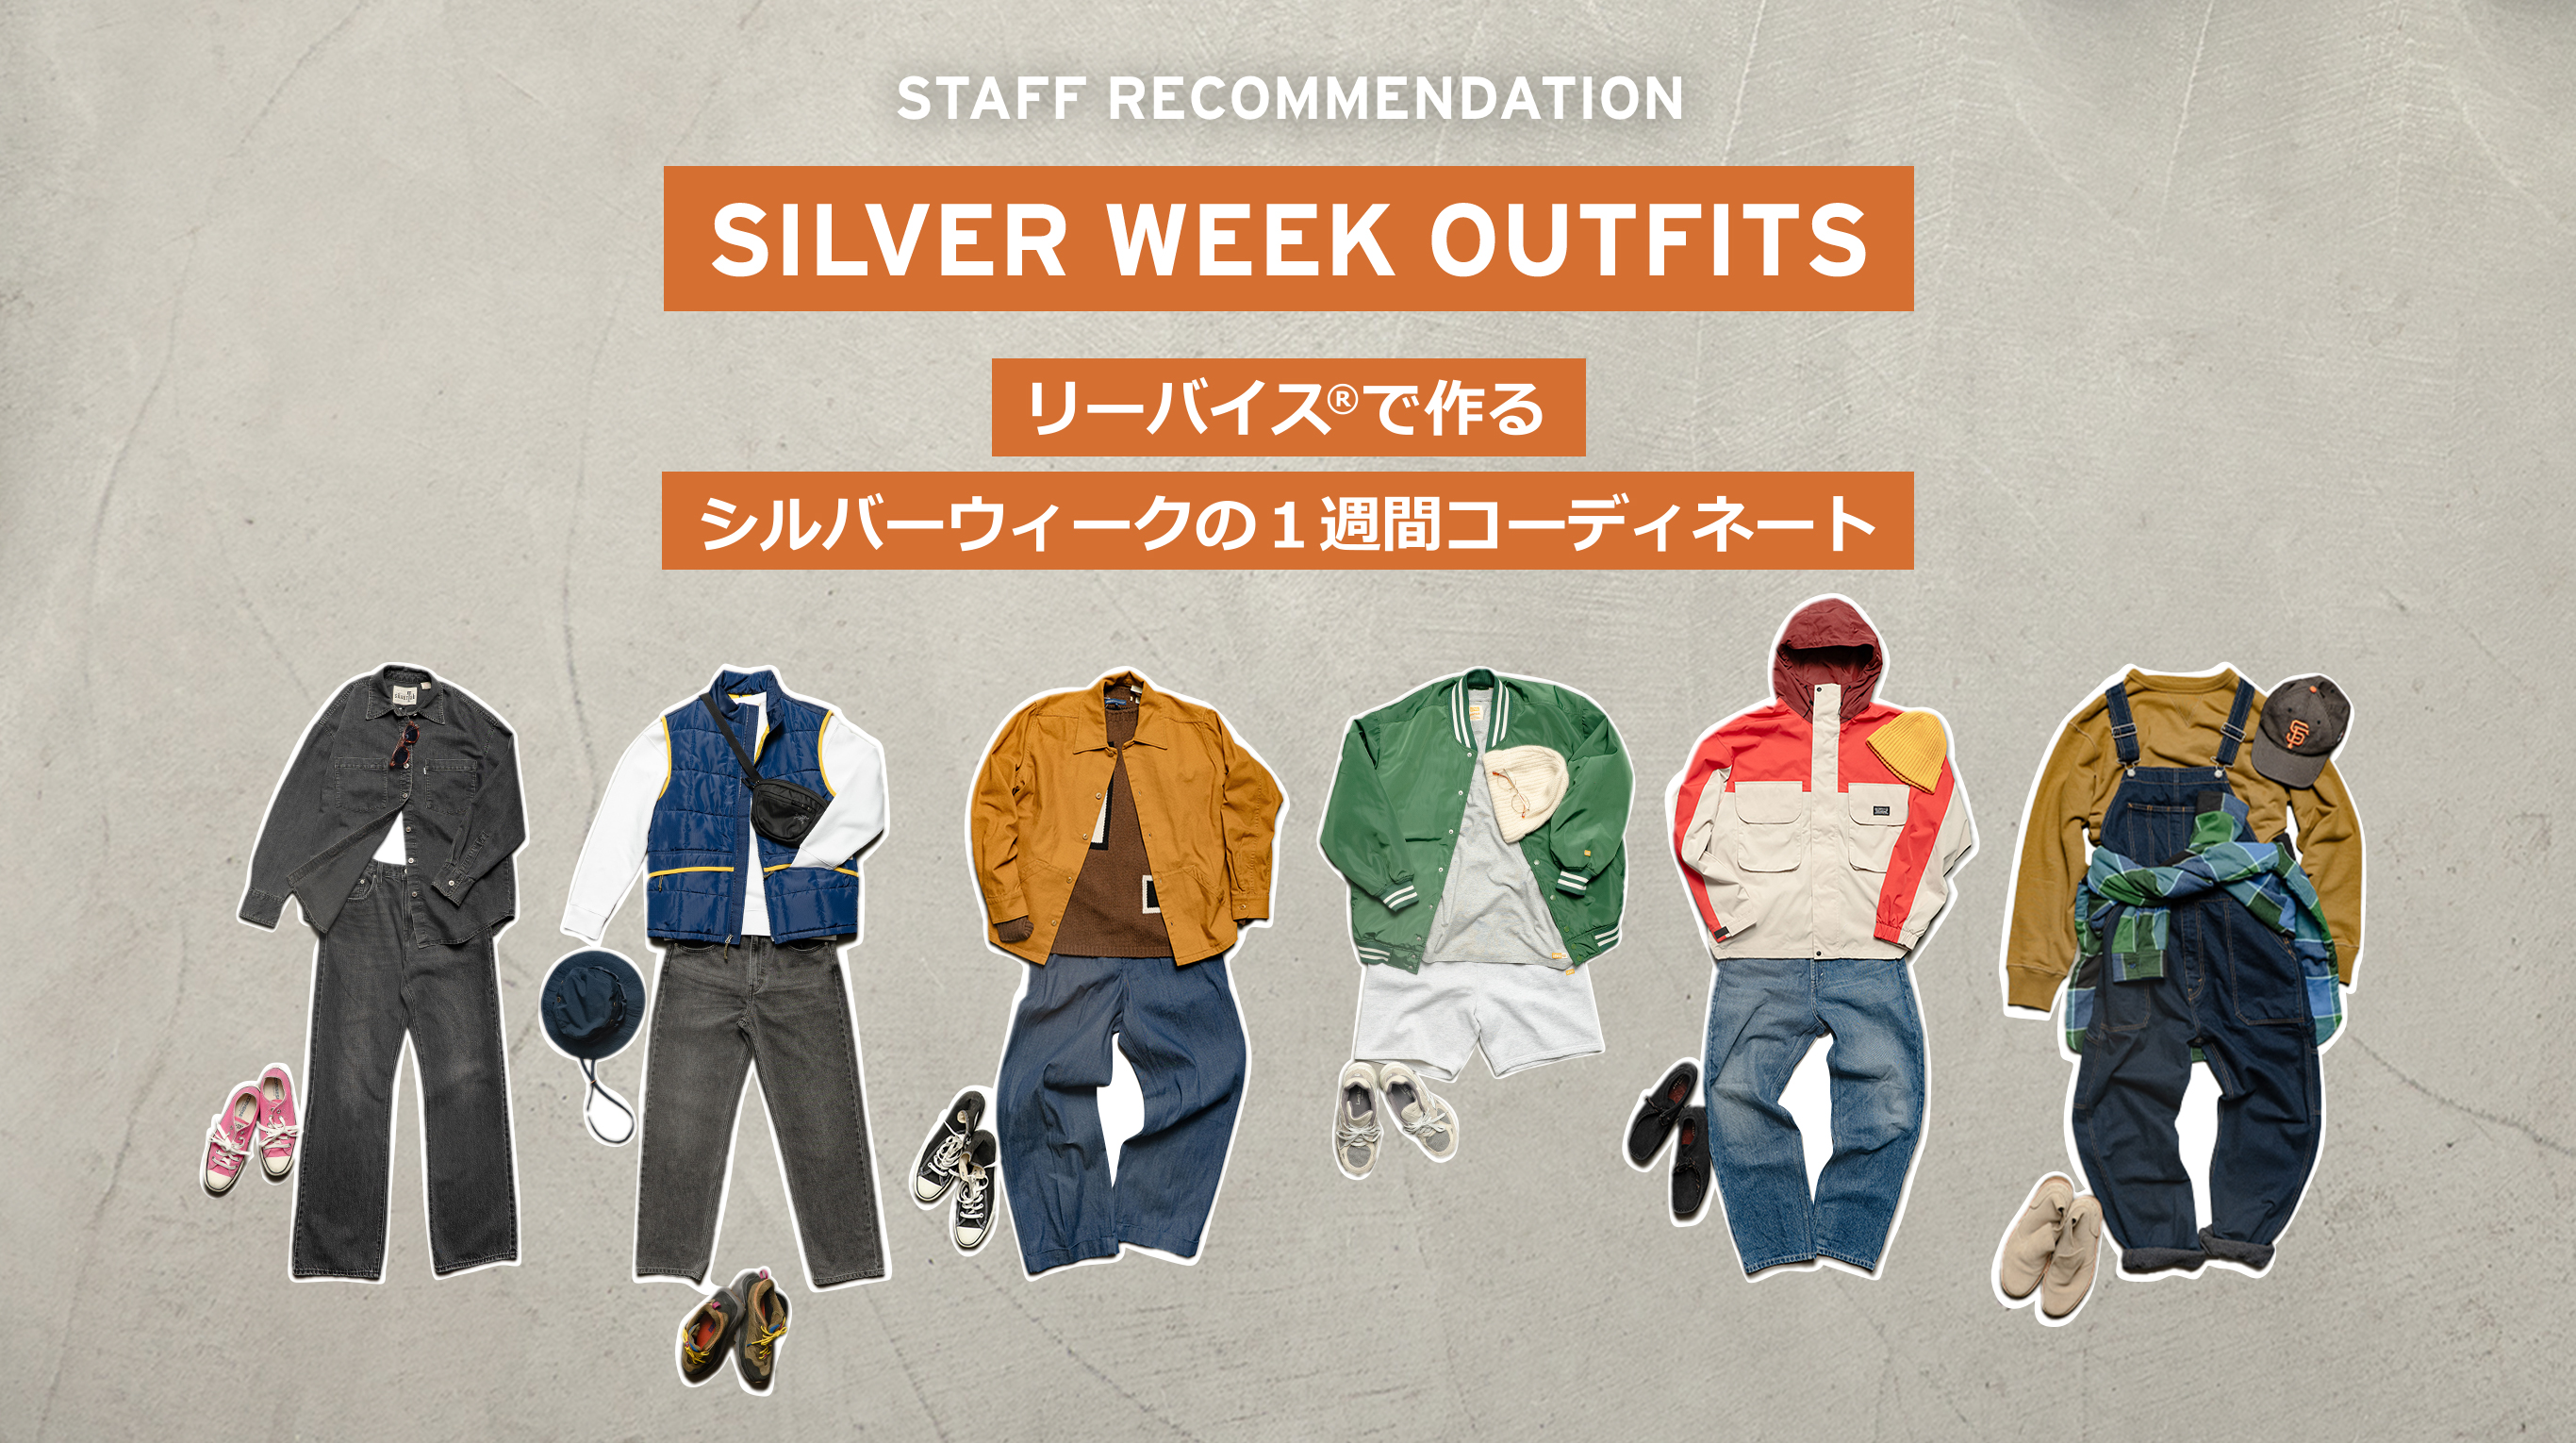 SILVER WEEK OUTFITS